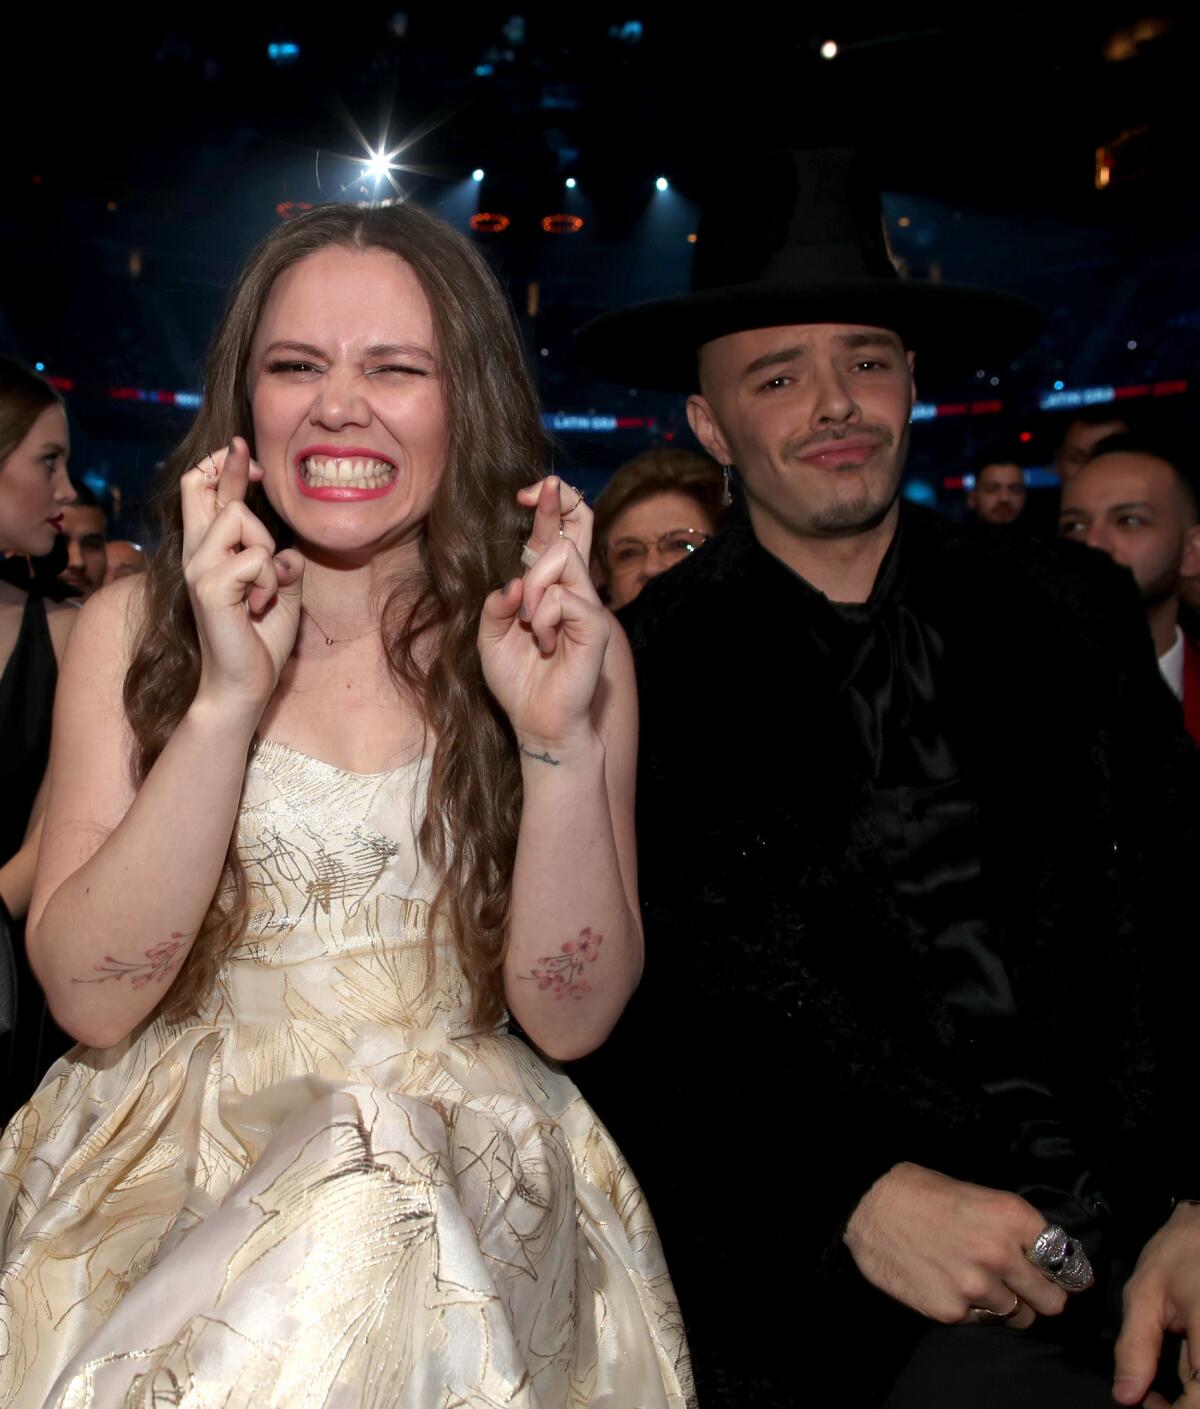 LAS VEGAS, NV - NOVEMBER 17: Recording artists Joy (L) and Jesse of Jesse & Joy attend The 17th Annual Latin Grammy Awards at T-Mobile Arena on November 17, 2016 in Las Vegas, Nevada. (Photo by Christopher Polk/Getty Images for LARAS) ** OUTS - ELSENT, FPG, CM - OUTS * NM, PH, VA if sourced by CT, LA or MoD **